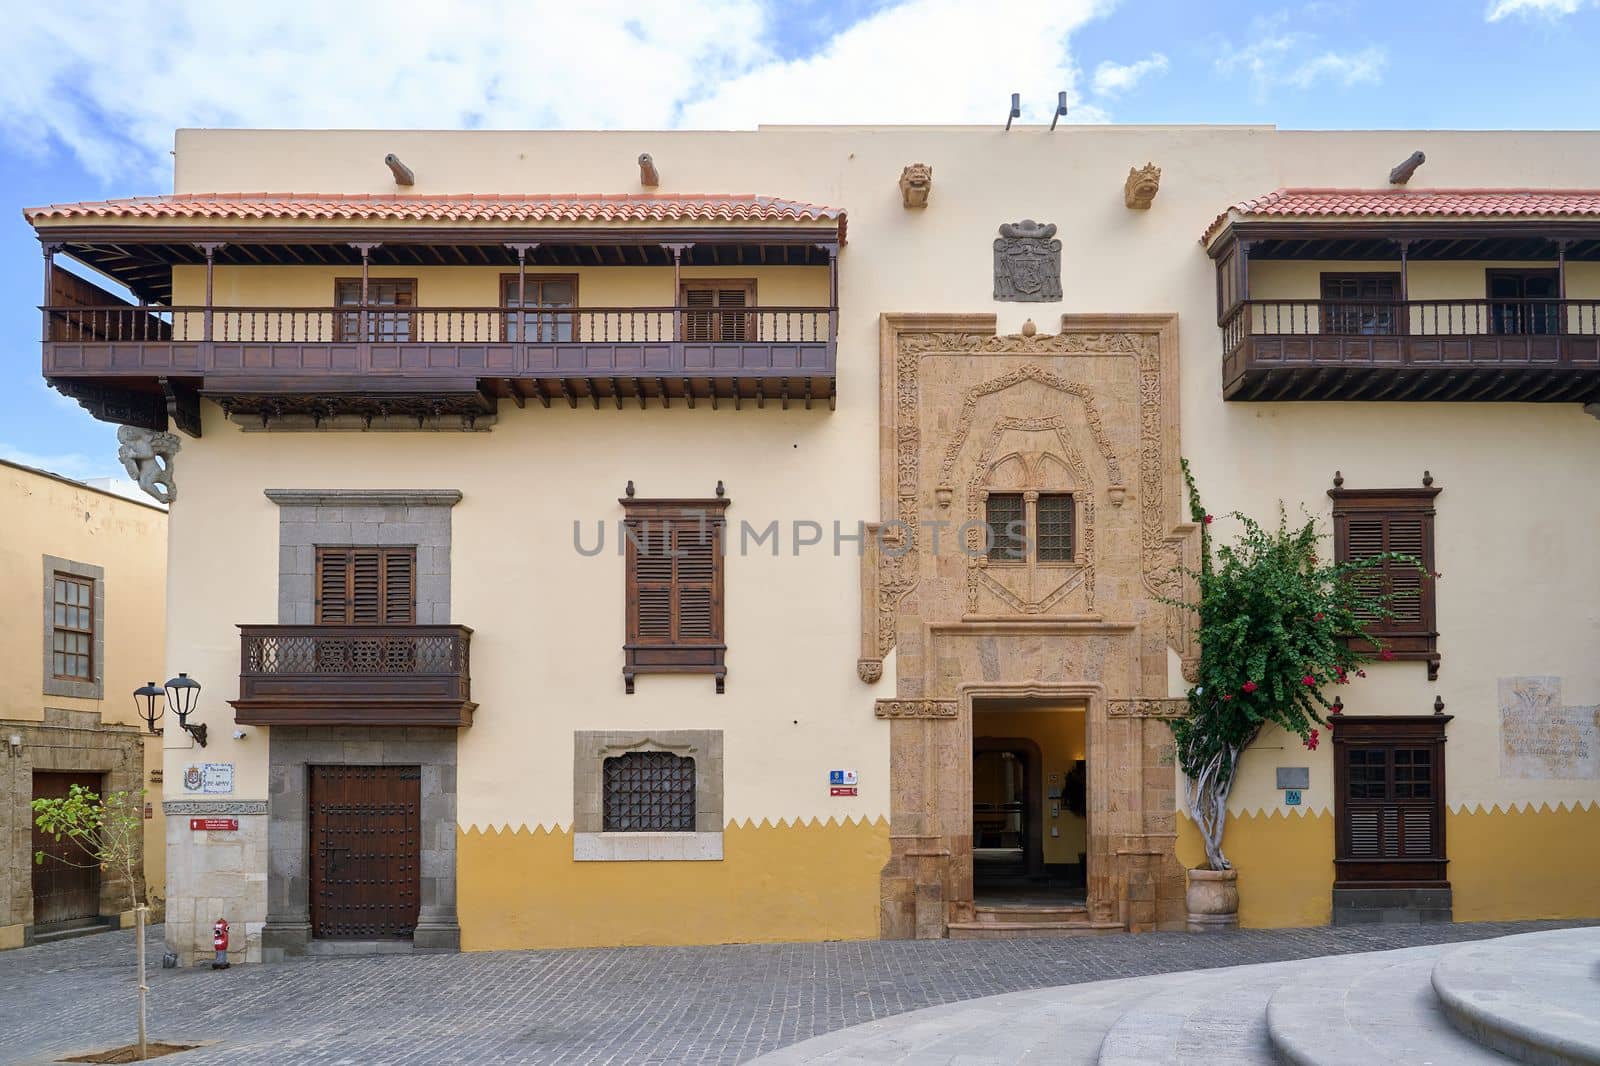 Las Palmas de Gran Canaria, Spain - September 18, 2022: Columbus House or Casa de Colon, a museum located in ornate former governor's house, visited by Columbus.